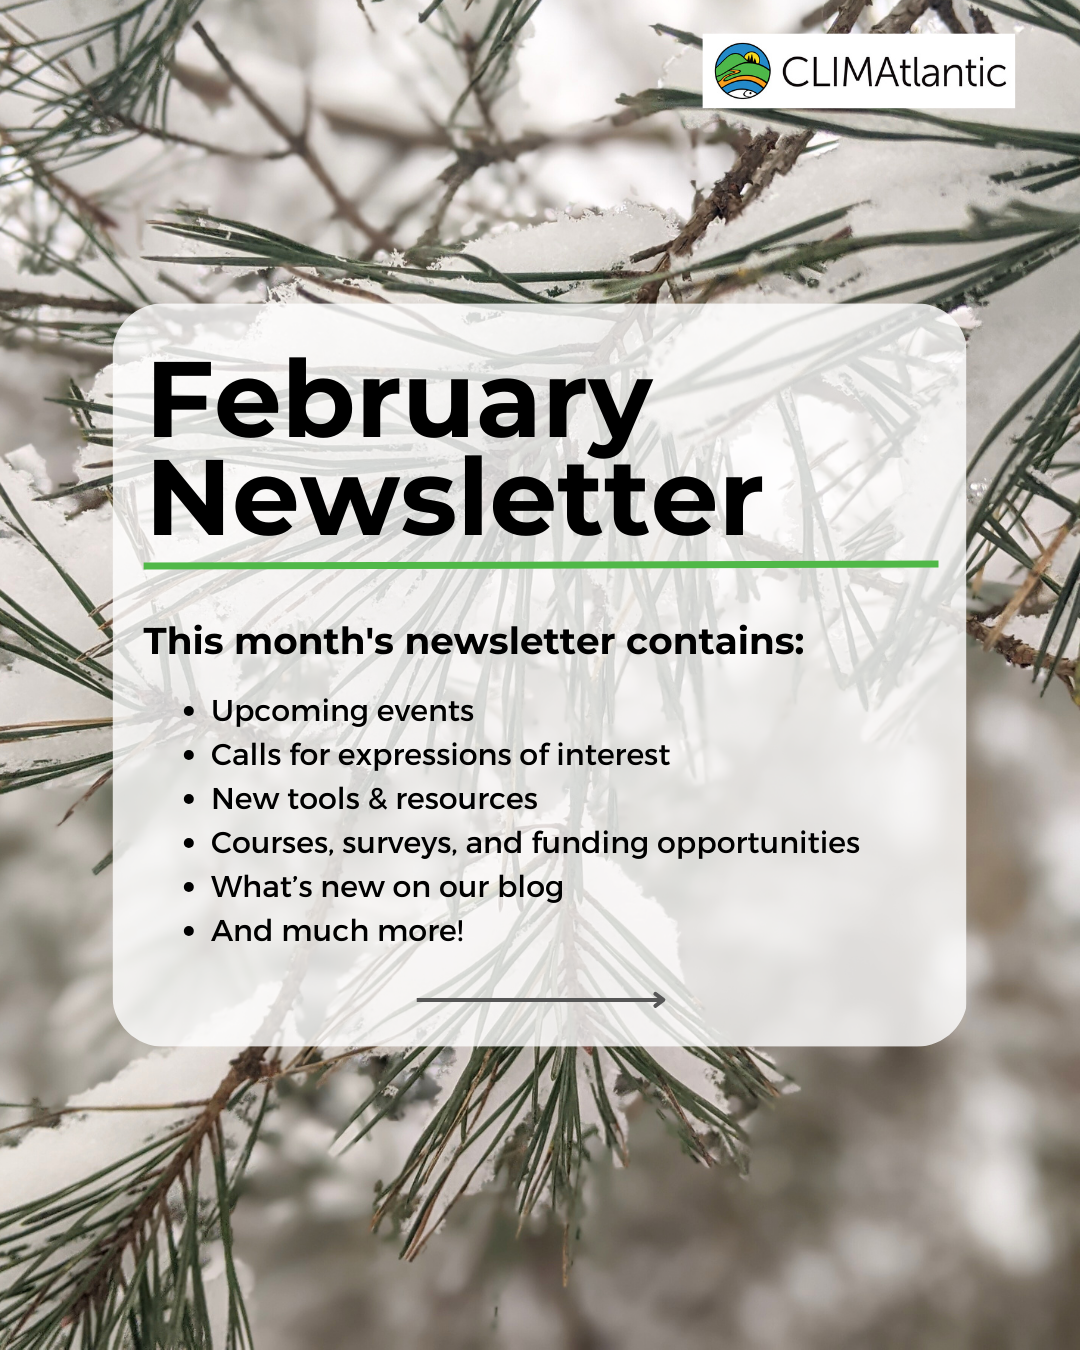 A graphic containing the table of contents for CLIMAtlantic's February newsletter. In the background is a snowy pine branch.